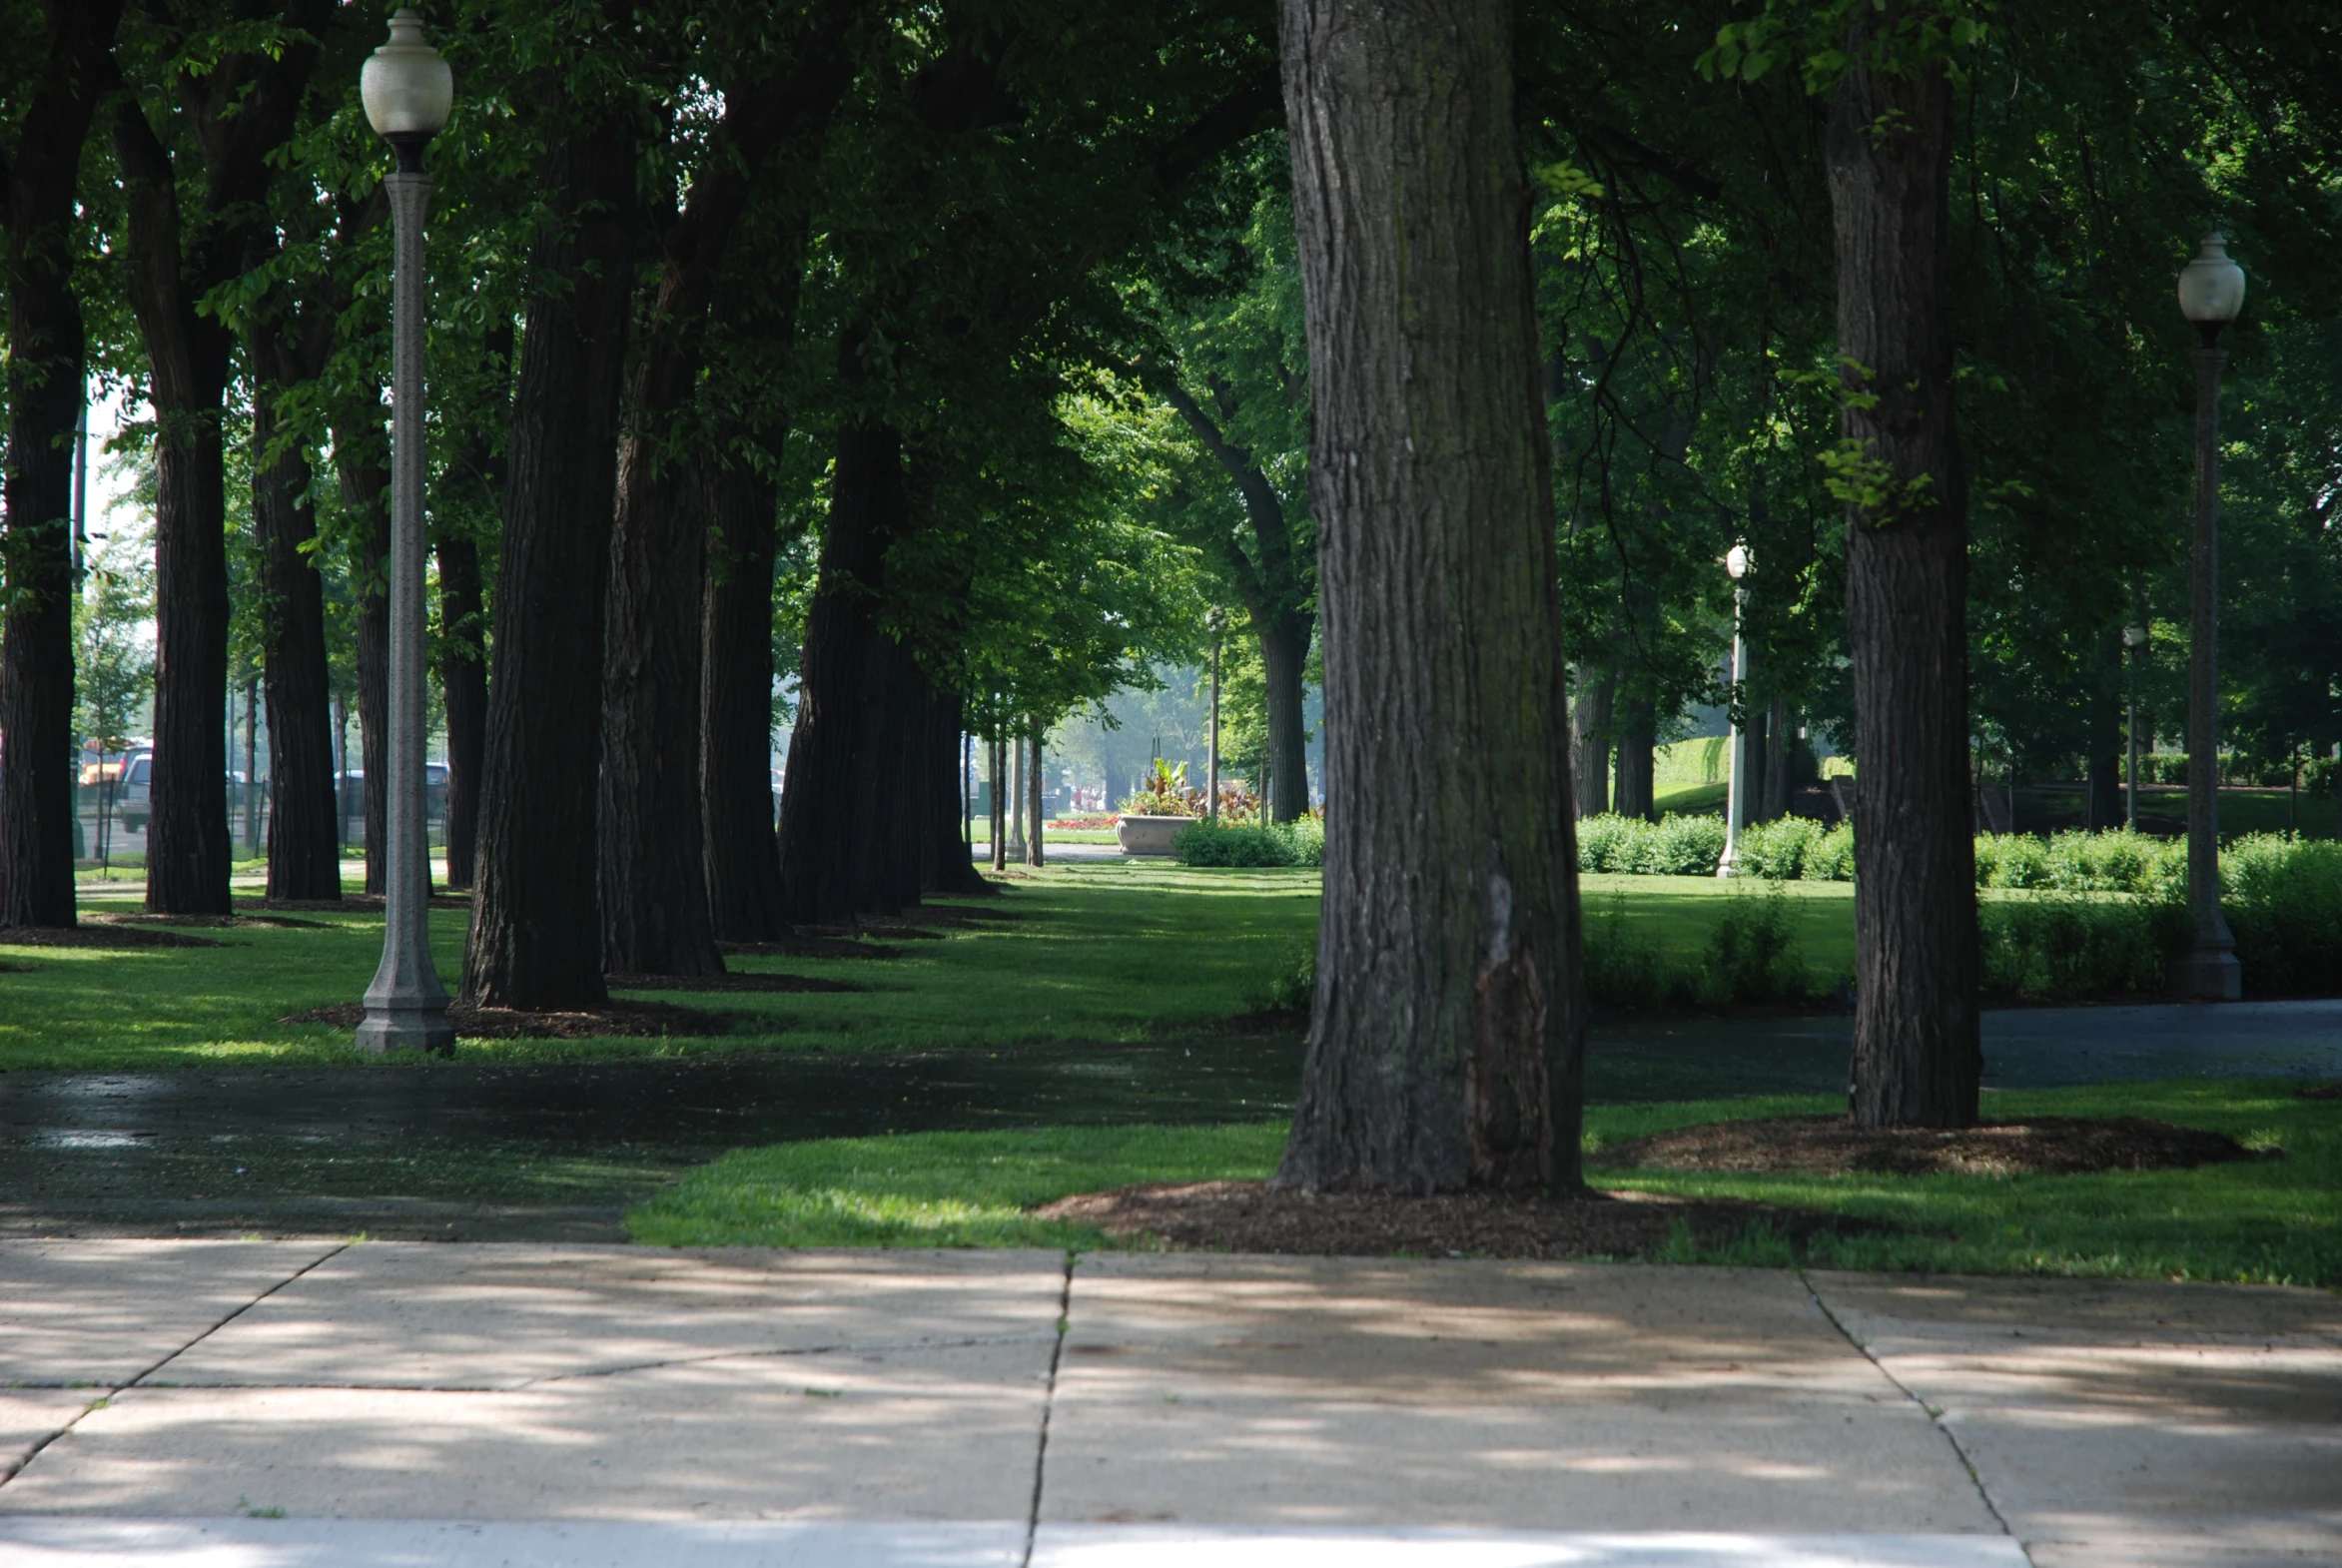 a sidewalk in a park between trees and a walkway